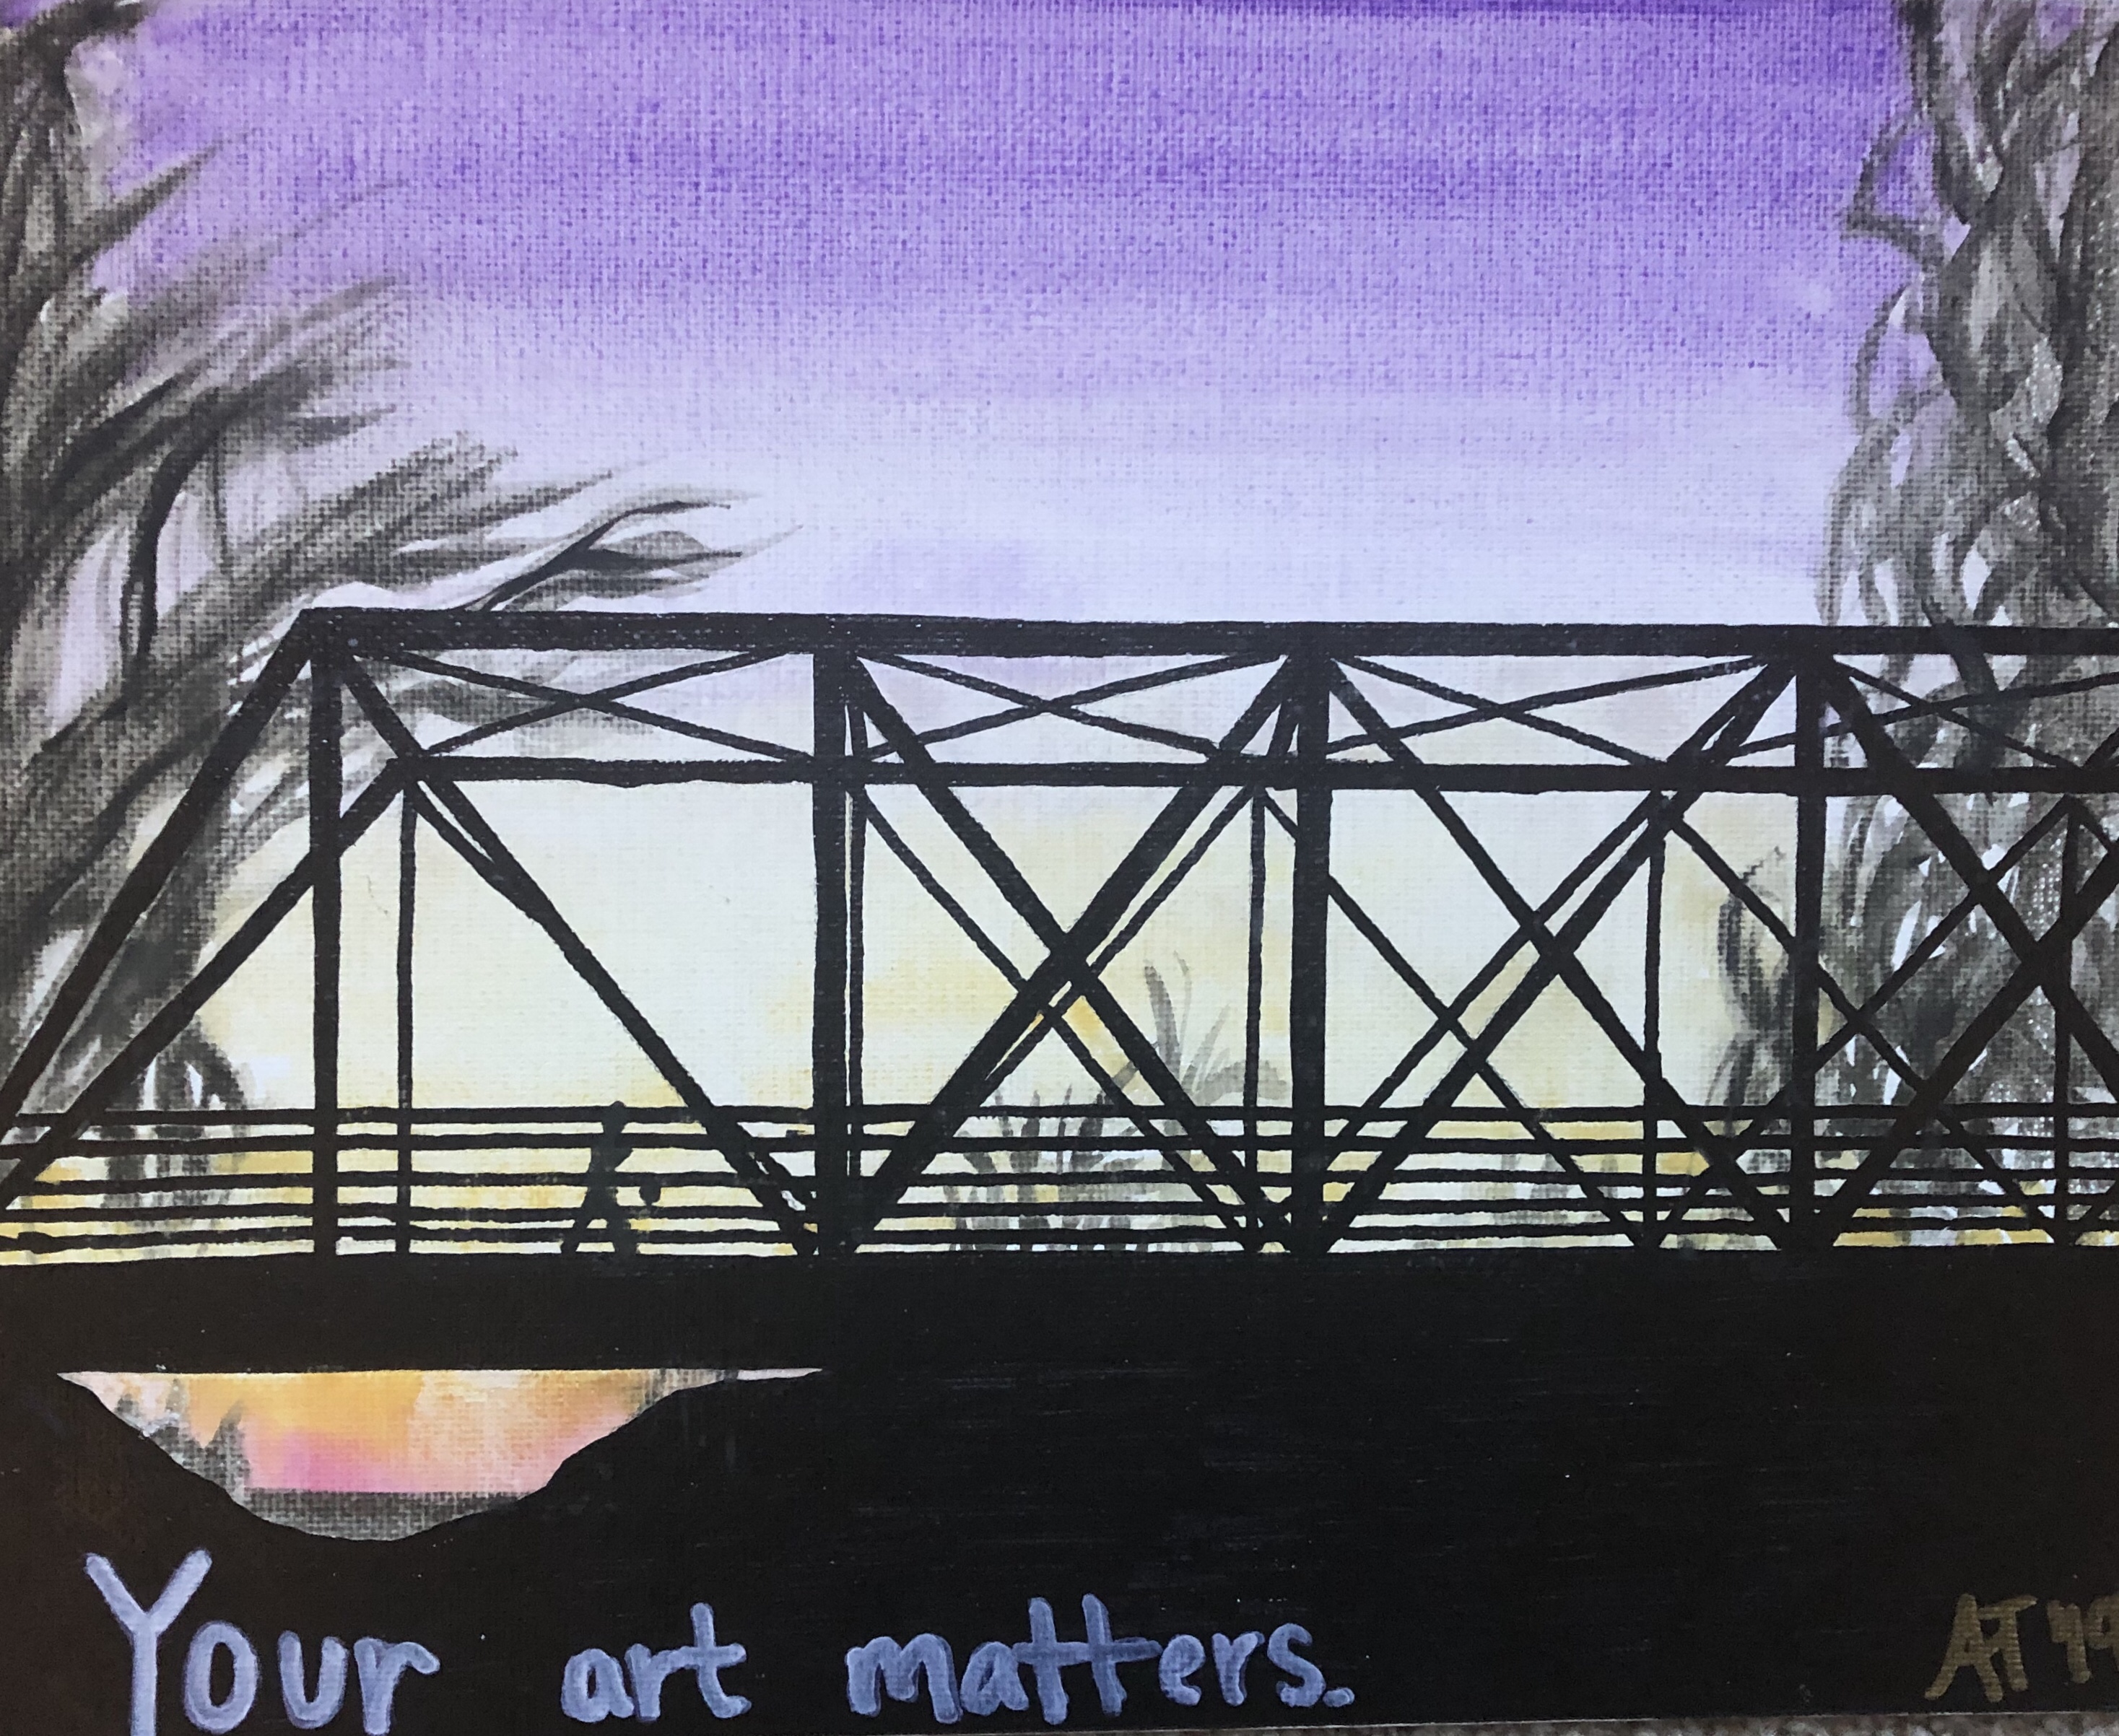 A silhouette of the famous one tree hill bridge with lucas scott walking across it bouncing a basketball with a deep purple sunset above it. Along the bottom the words "your art matters." are painted.